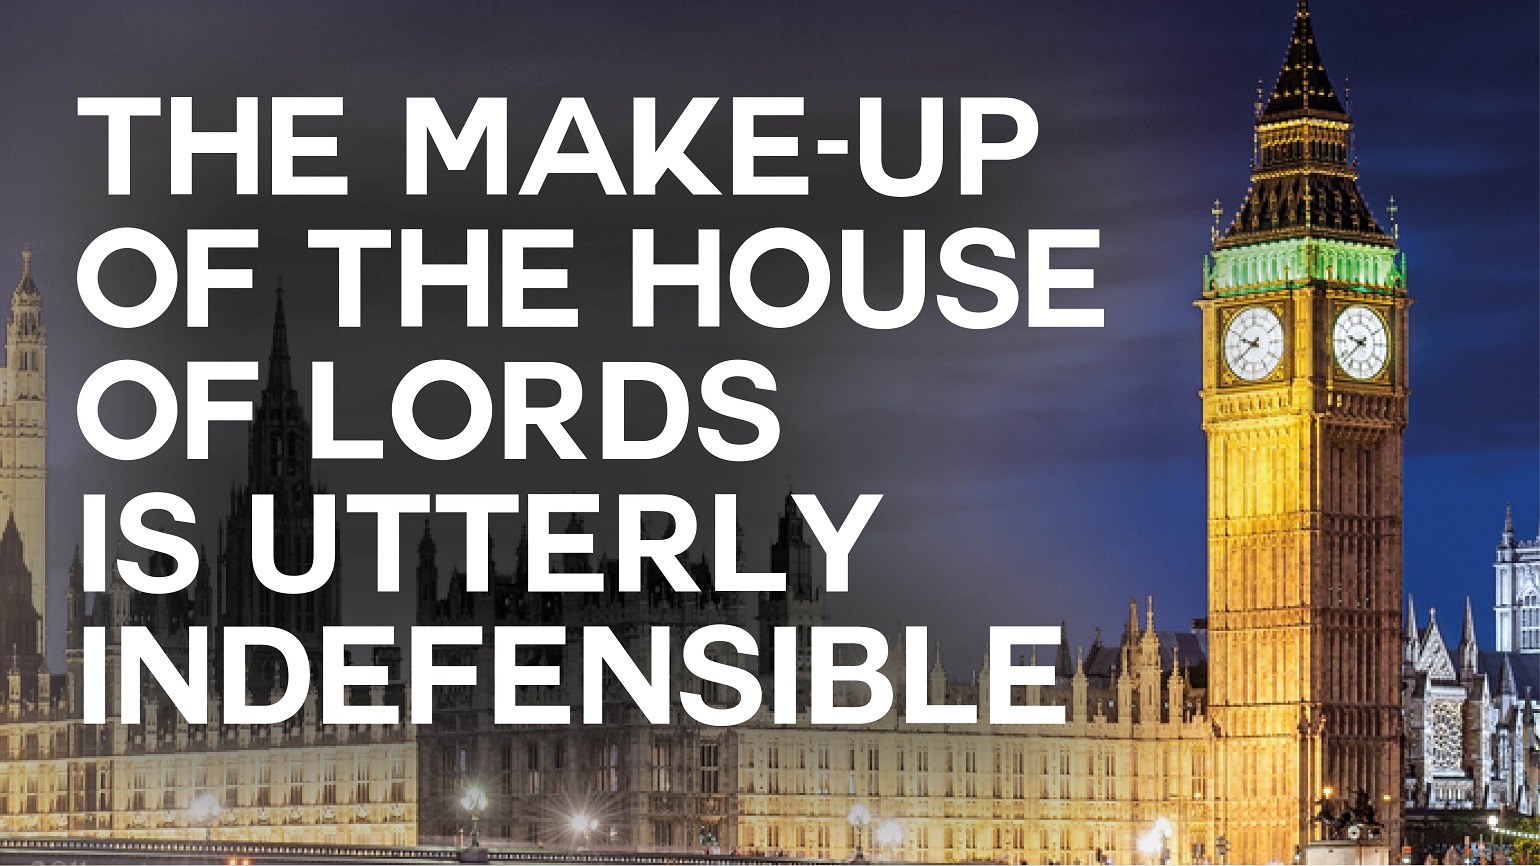 A photo of the Palace of Westminster with text overlaid reading "The make-up of the The House of Lords is utterly indefensible"